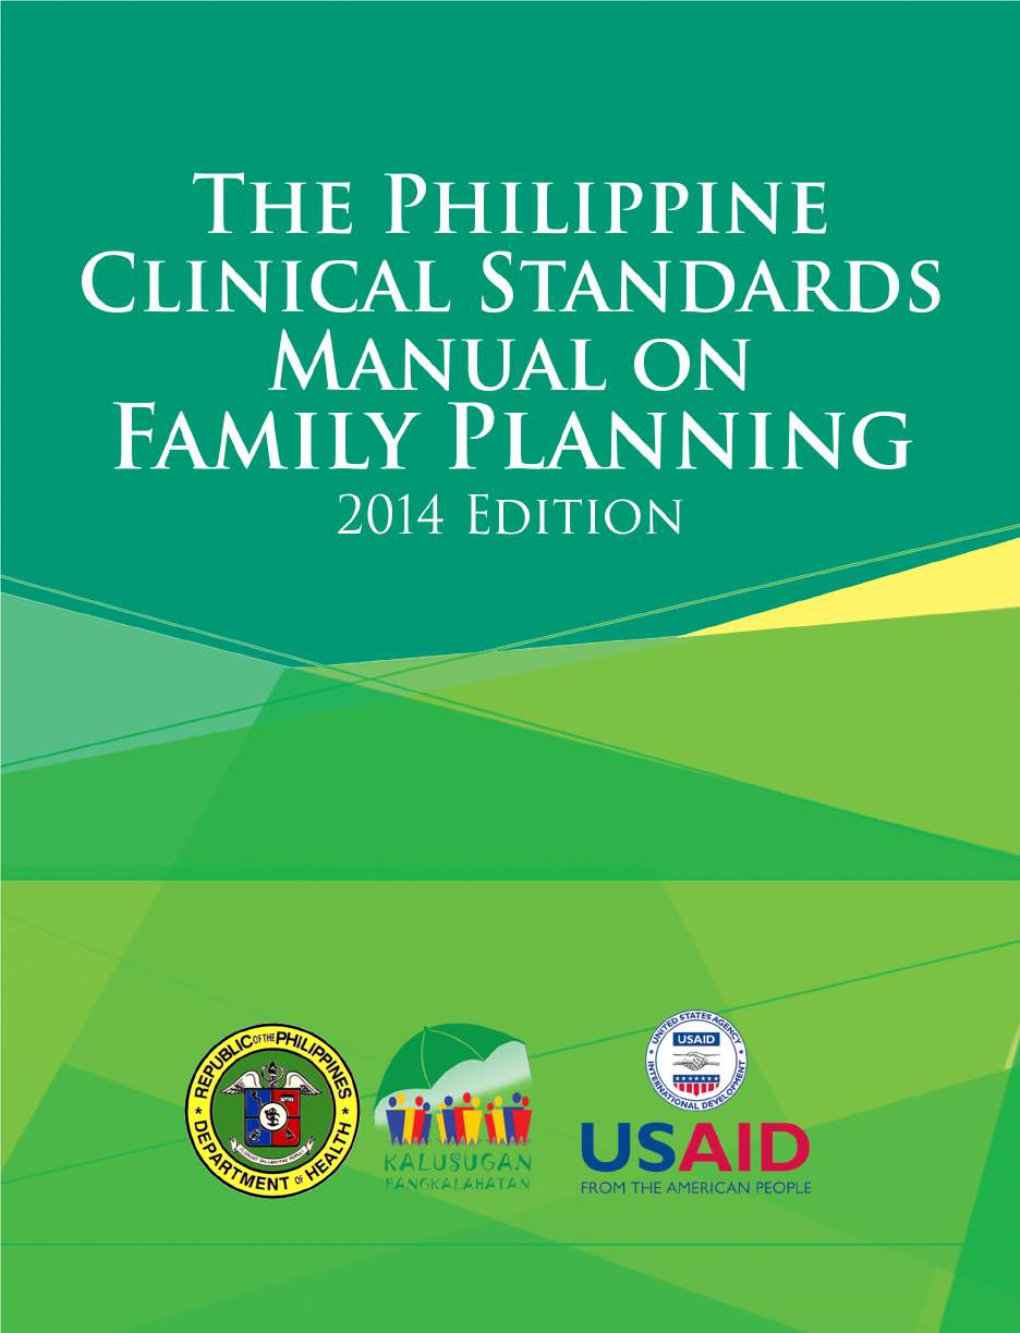 The Philippine Clinical Standards Manual on Family Planning Tool